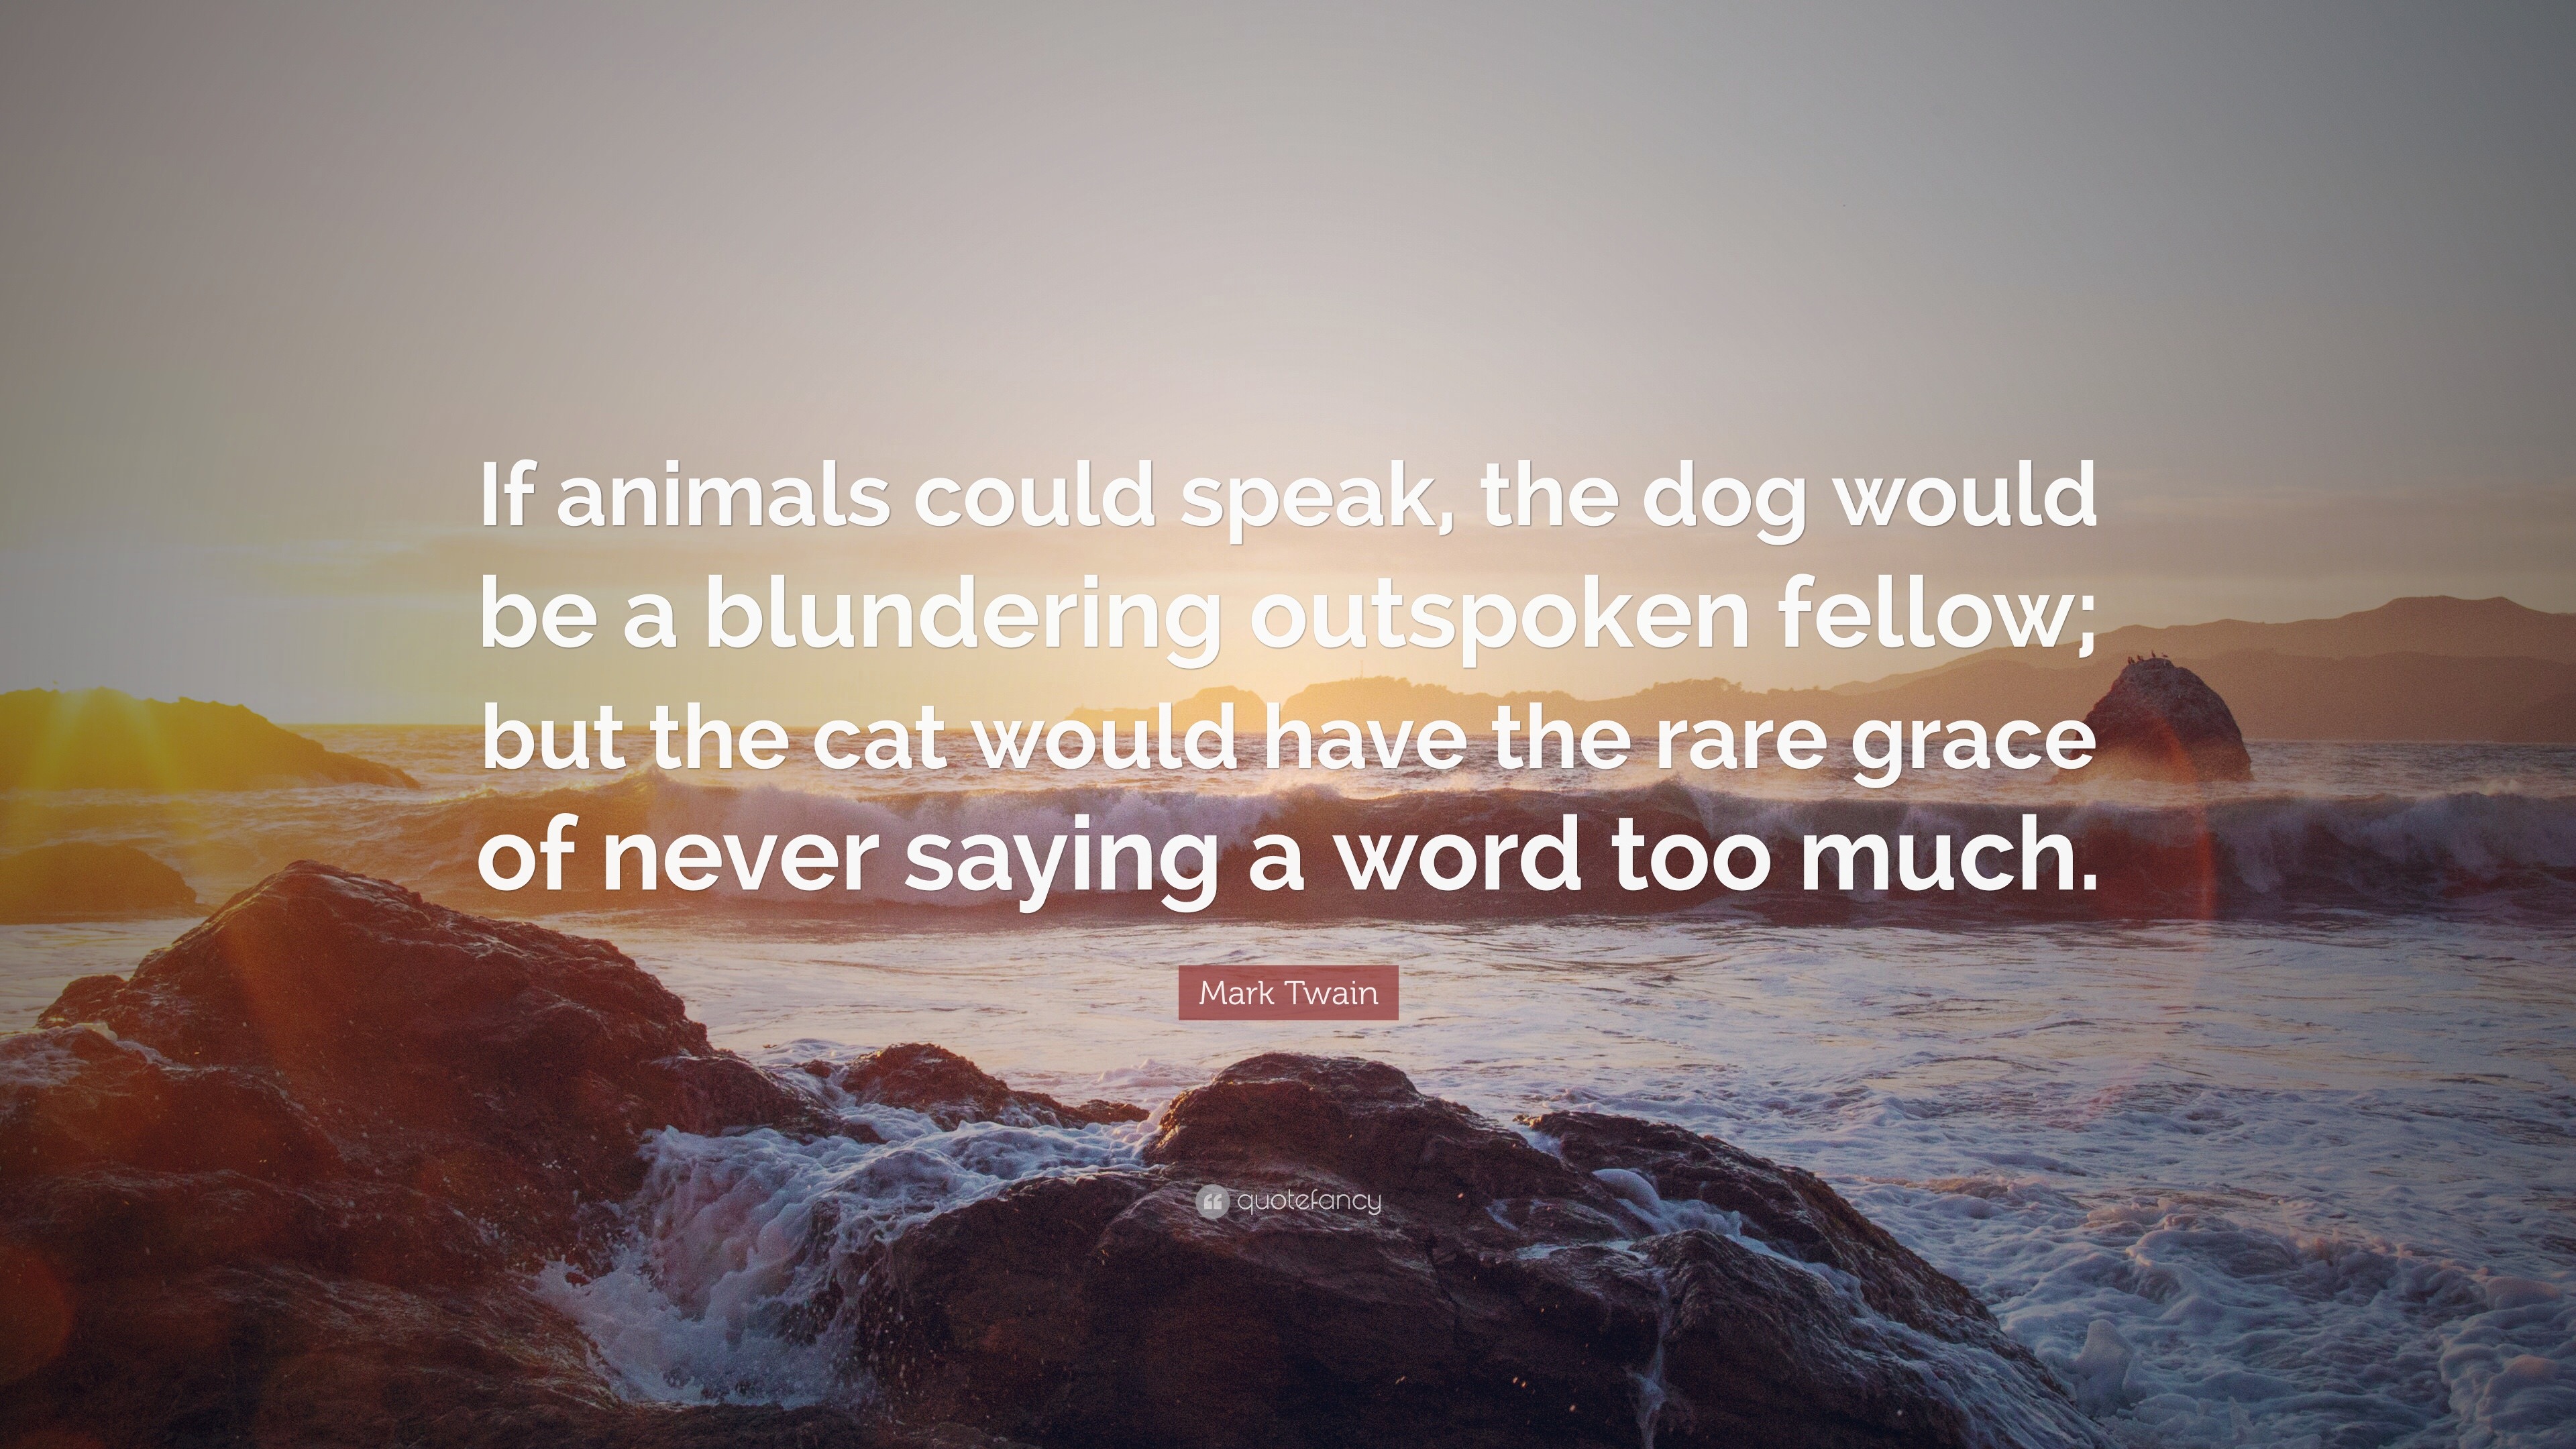 what did mark twain say about dogs